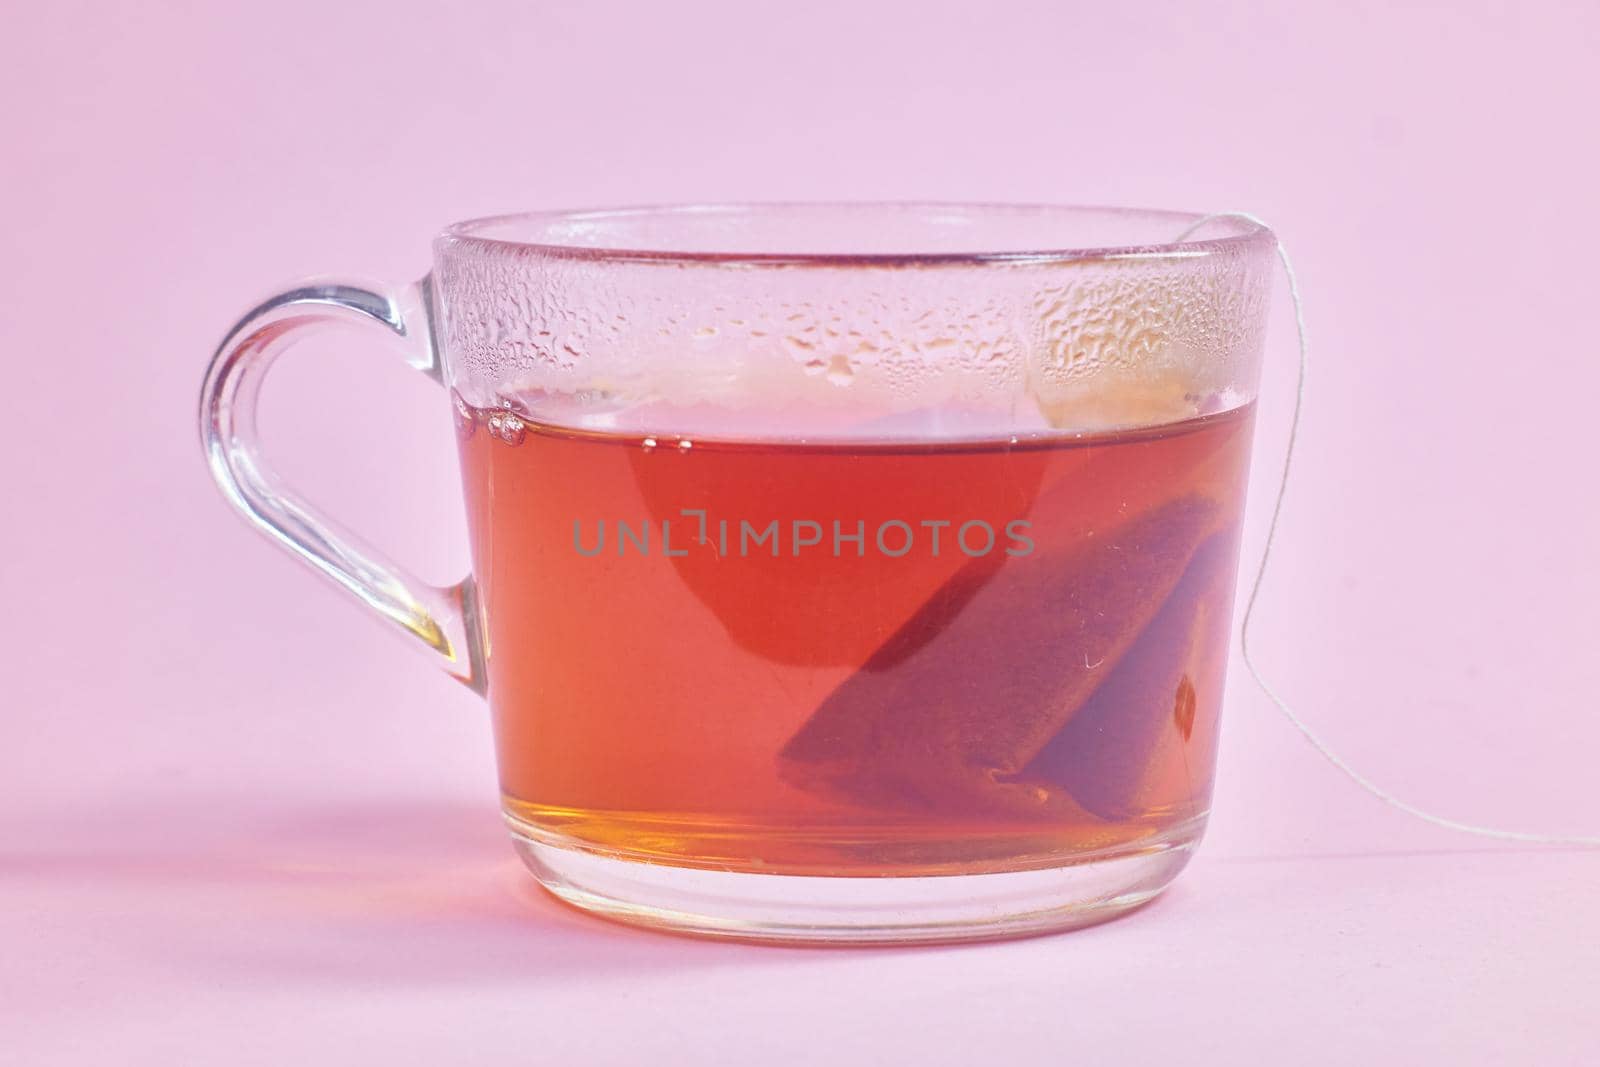 the tea bag is brewed in a transparent glass cup on a pink background by vadiar